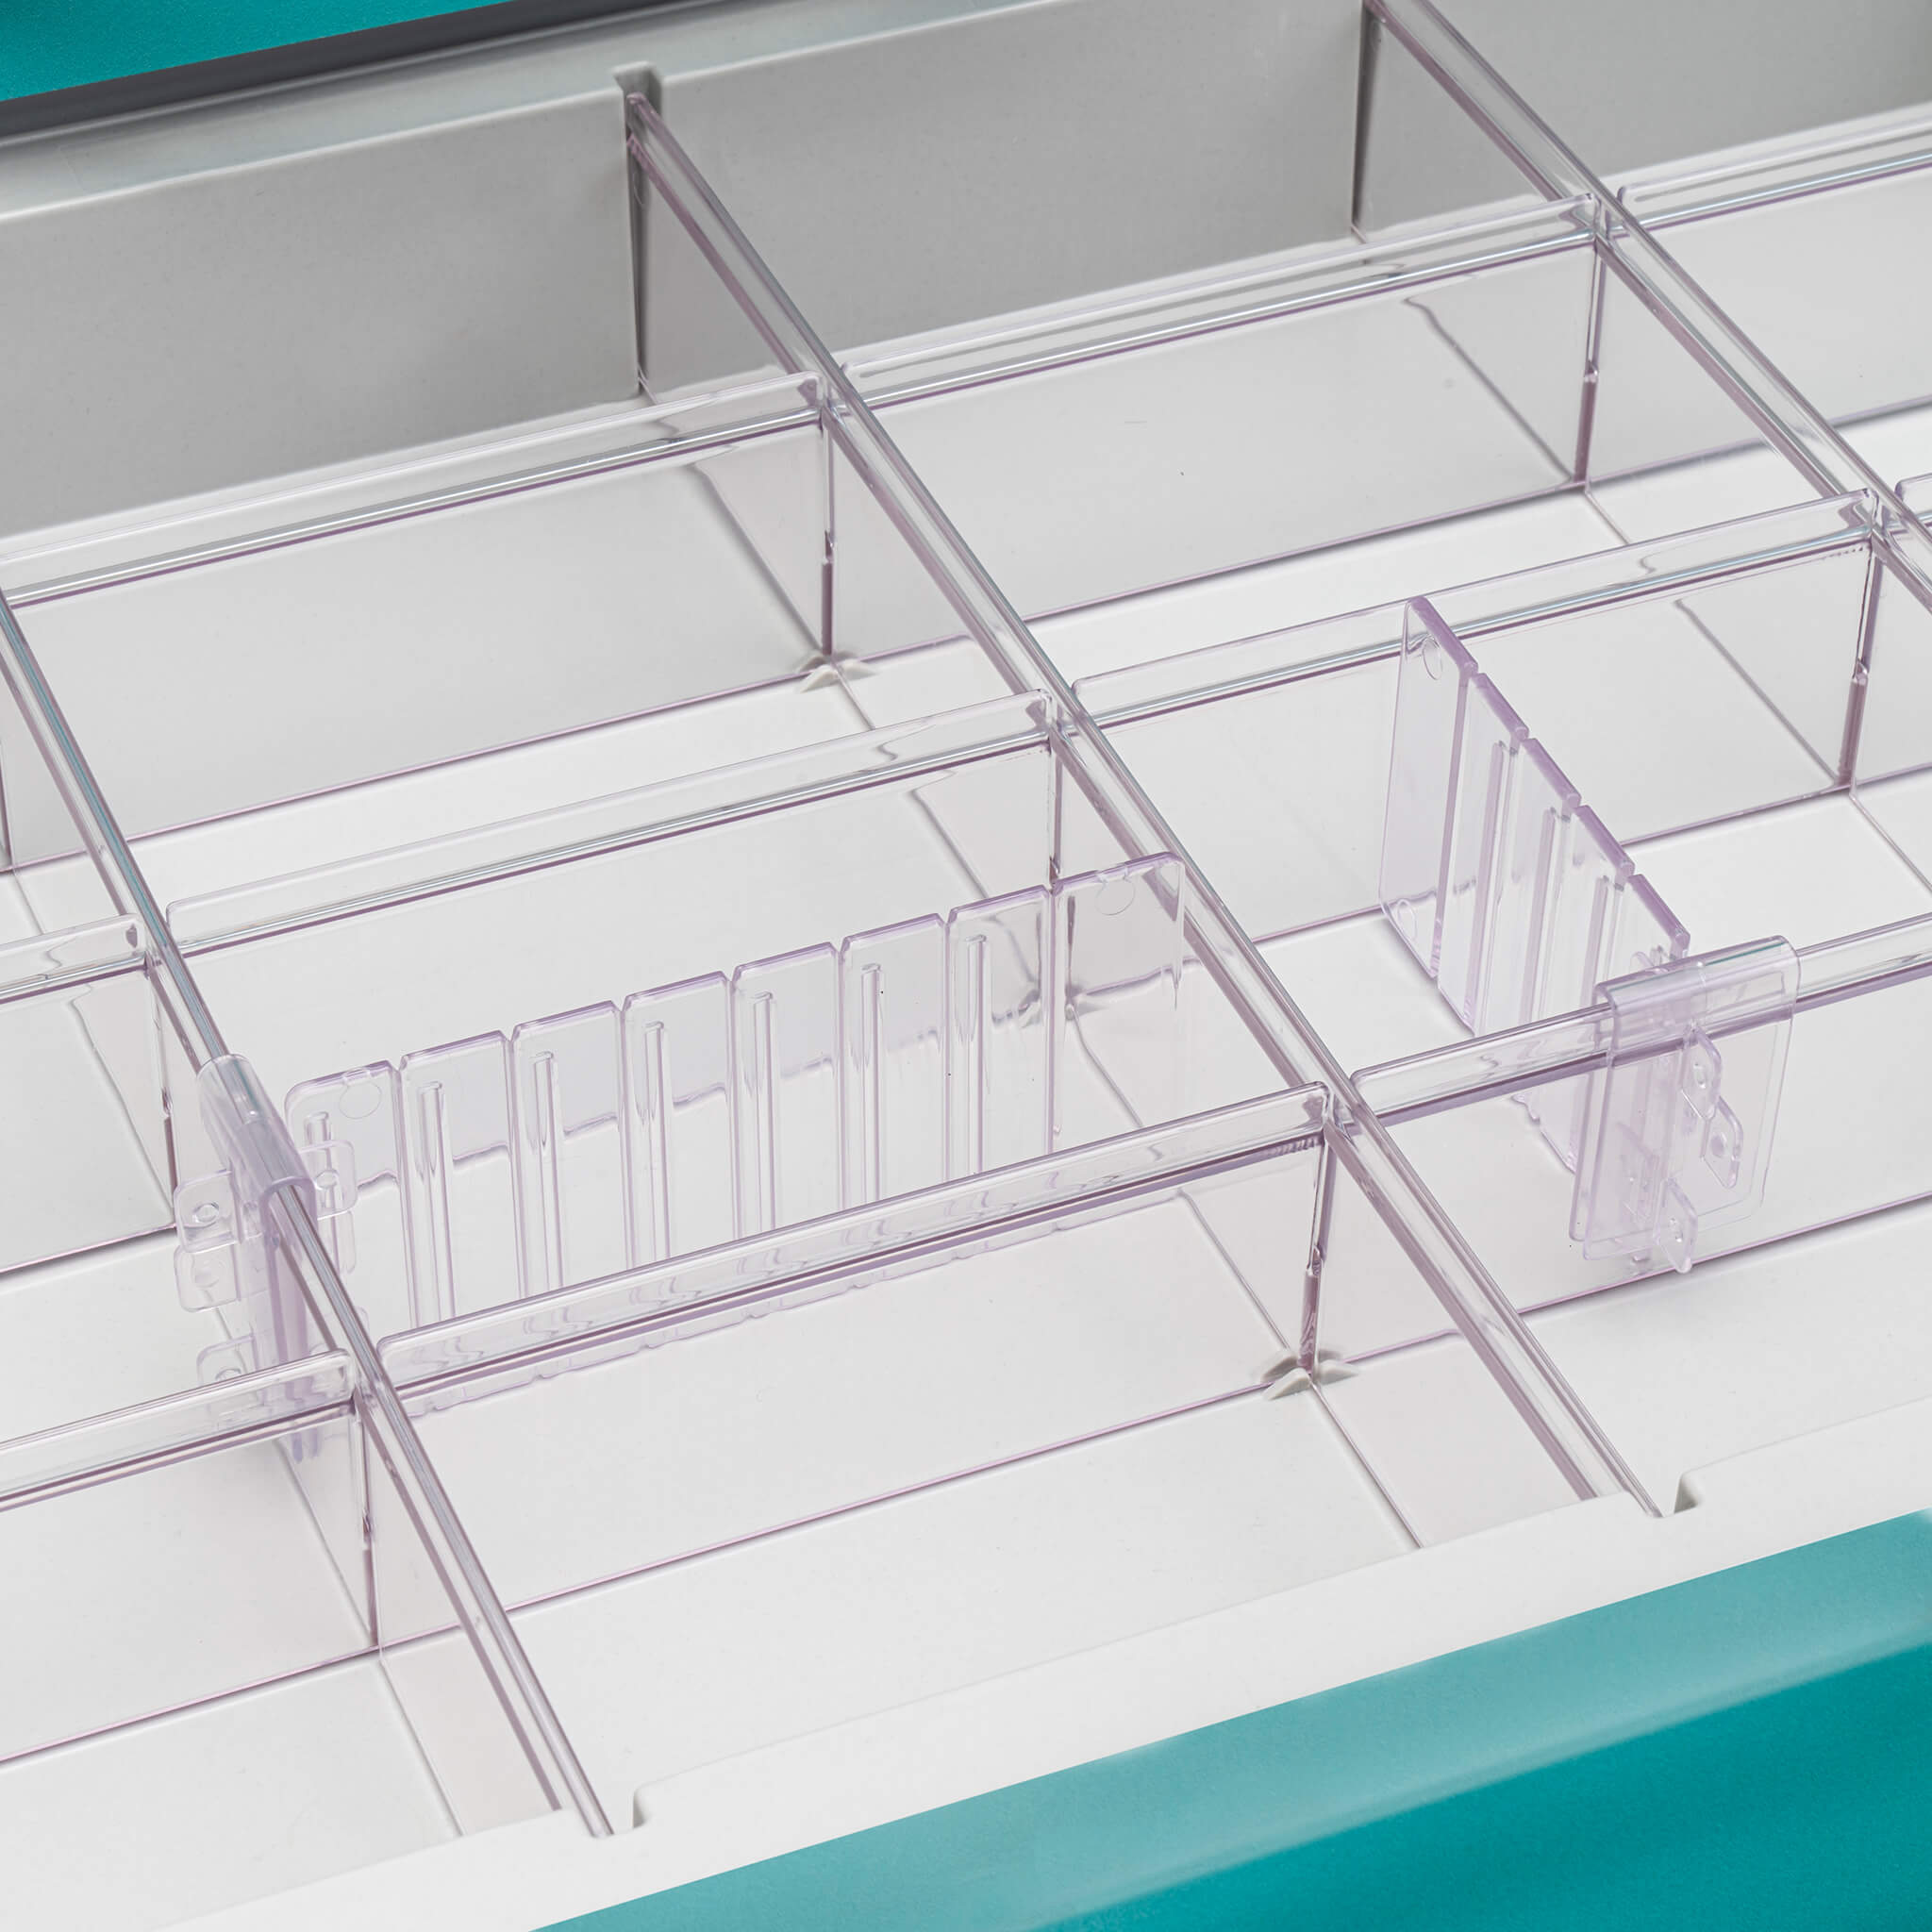 https://innerspacehealthcare.com/wp-content/uploads/cabinet-cart-accessories/interior-storage/3-inch-adjustable-snap-off-dividers-divider-clips-02.jpg